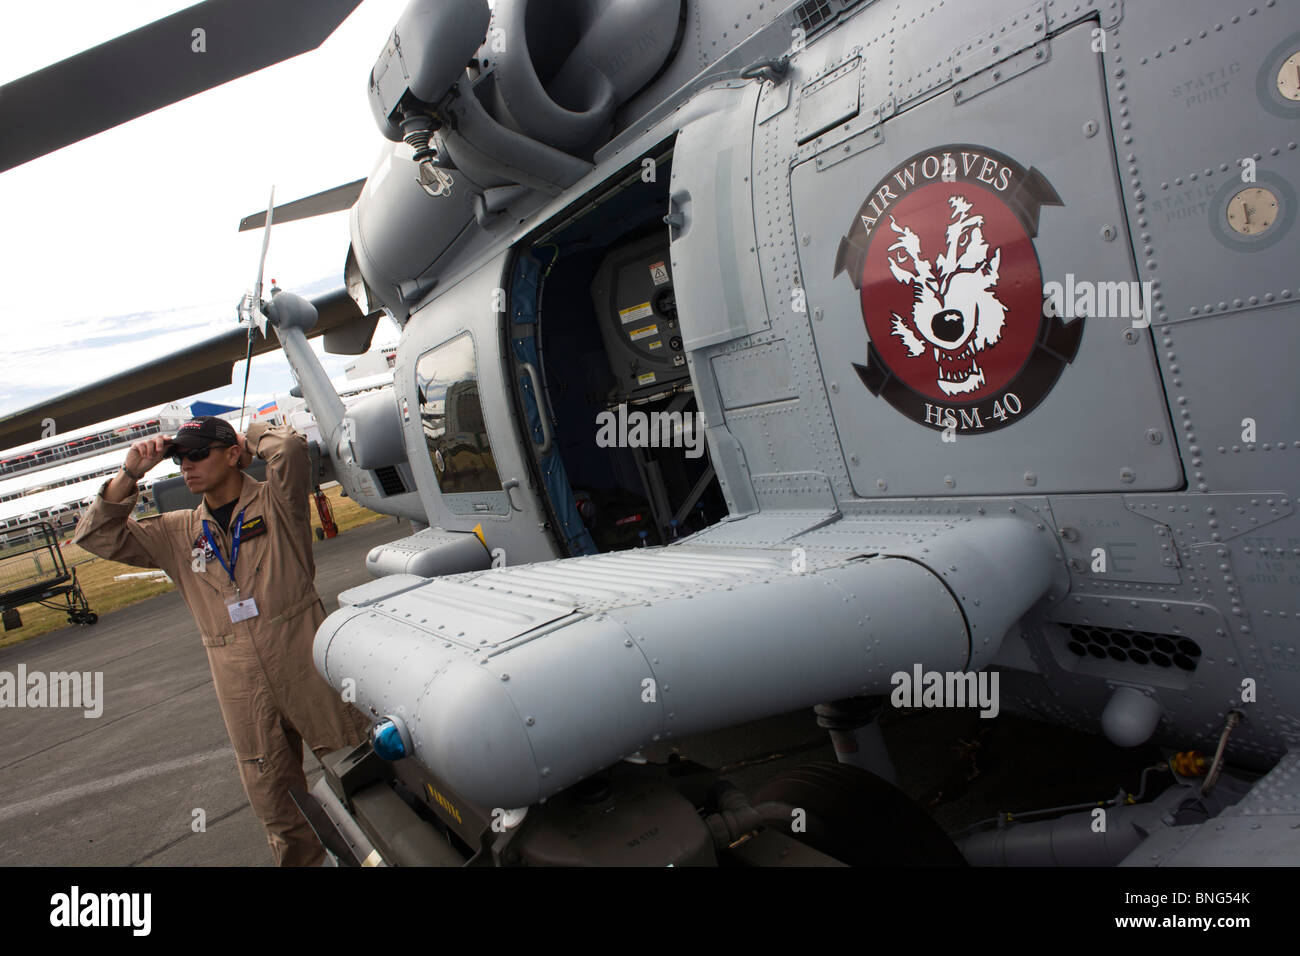 US Navy pilot and his Sikorsky MH-60R helicopter at the Farnborough Airshow. Stock Photo